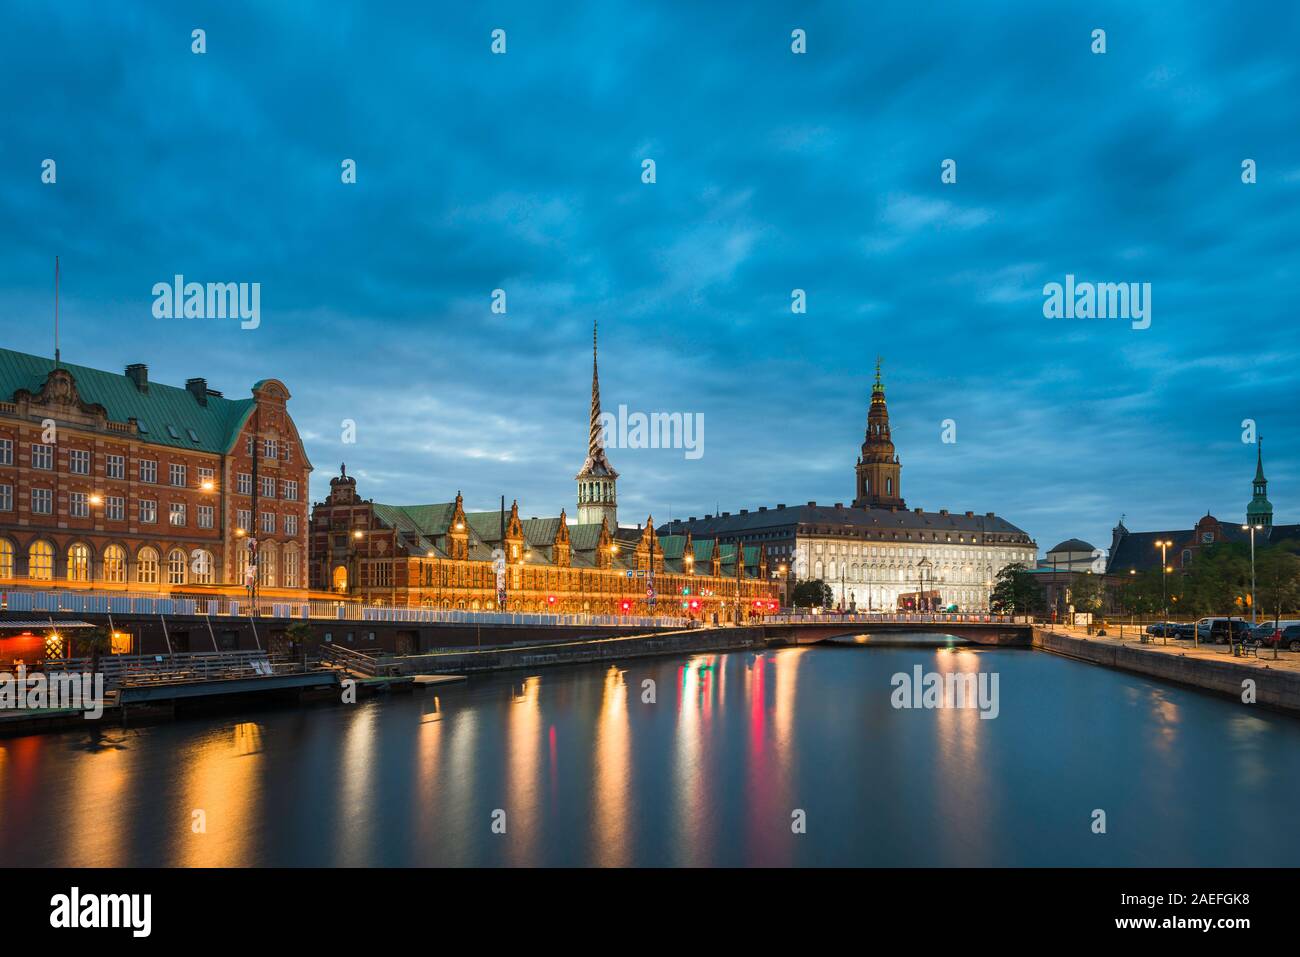 Copenhagen night, view of Slotsholmen canal with the Borse stock exchange building and Christianborg Slot (palace) visible in the distance, Copenhagen. Stock Photo